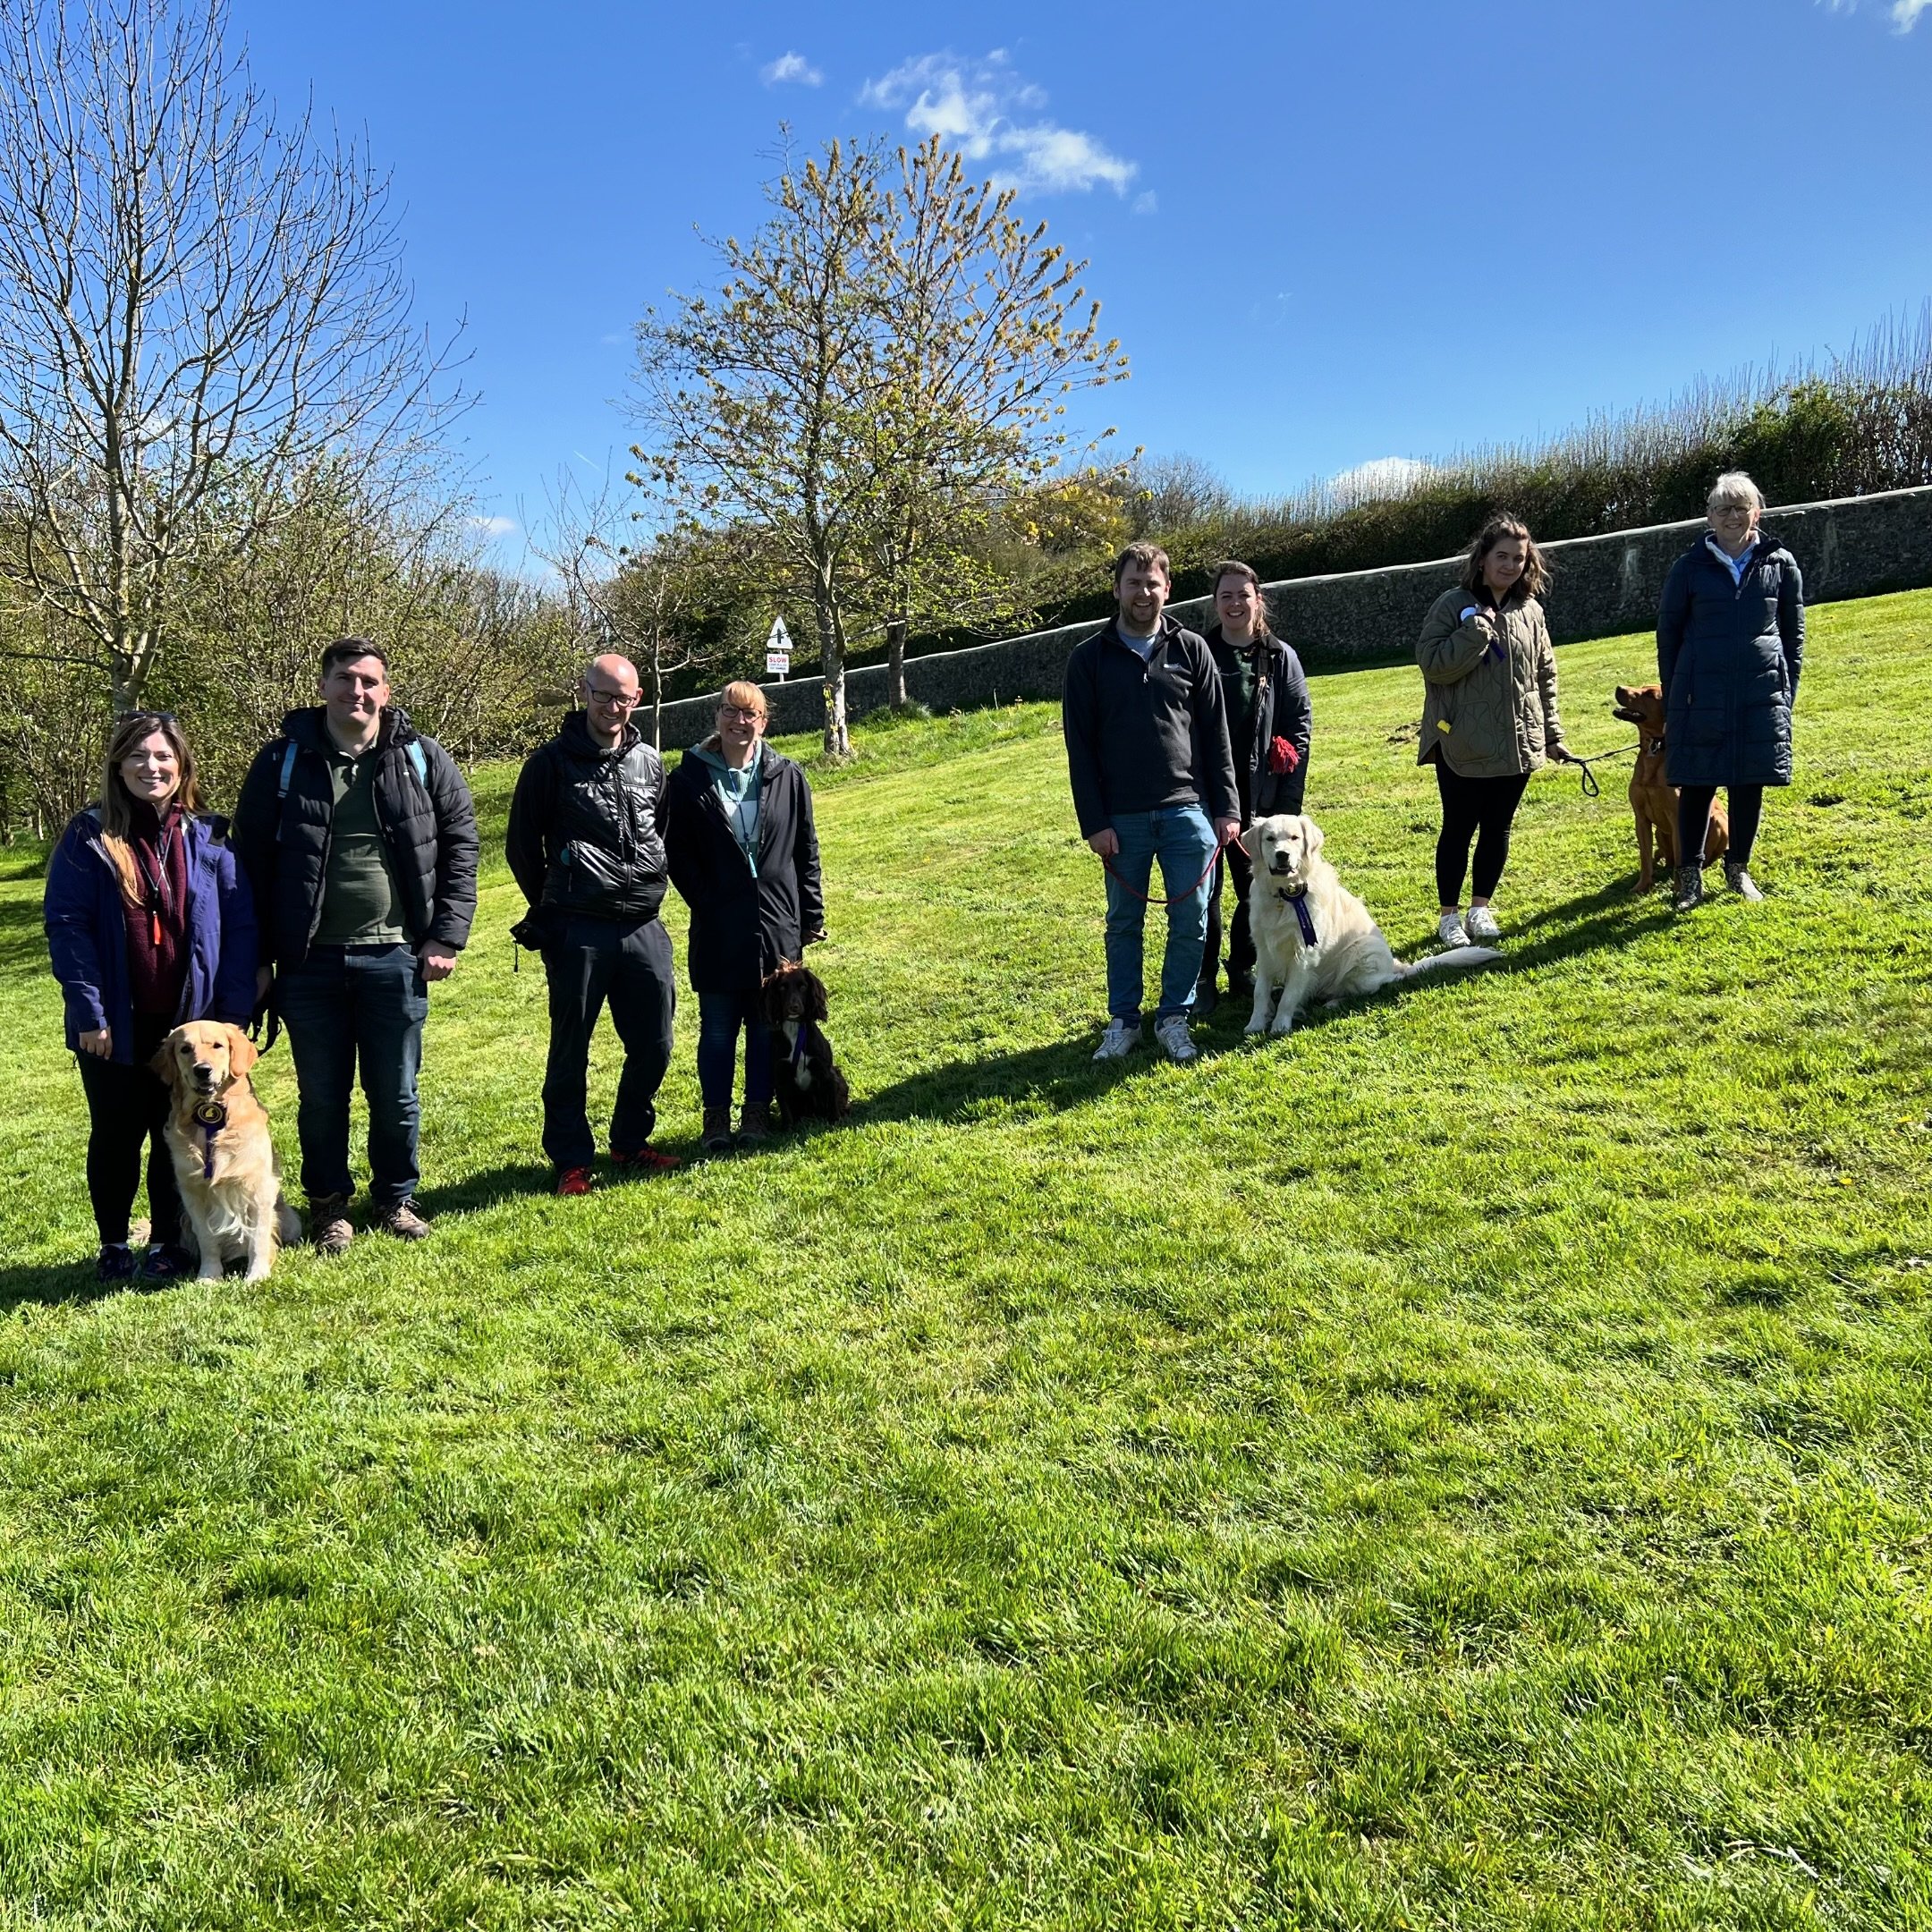 What a beautiful day and what a great finish to our Beginner Pet Gundog term. These lovely people nailed the assessment with their dogs today and deserve huge congratulations. Each and everyone faced a challenge for starters. But with experienced gui